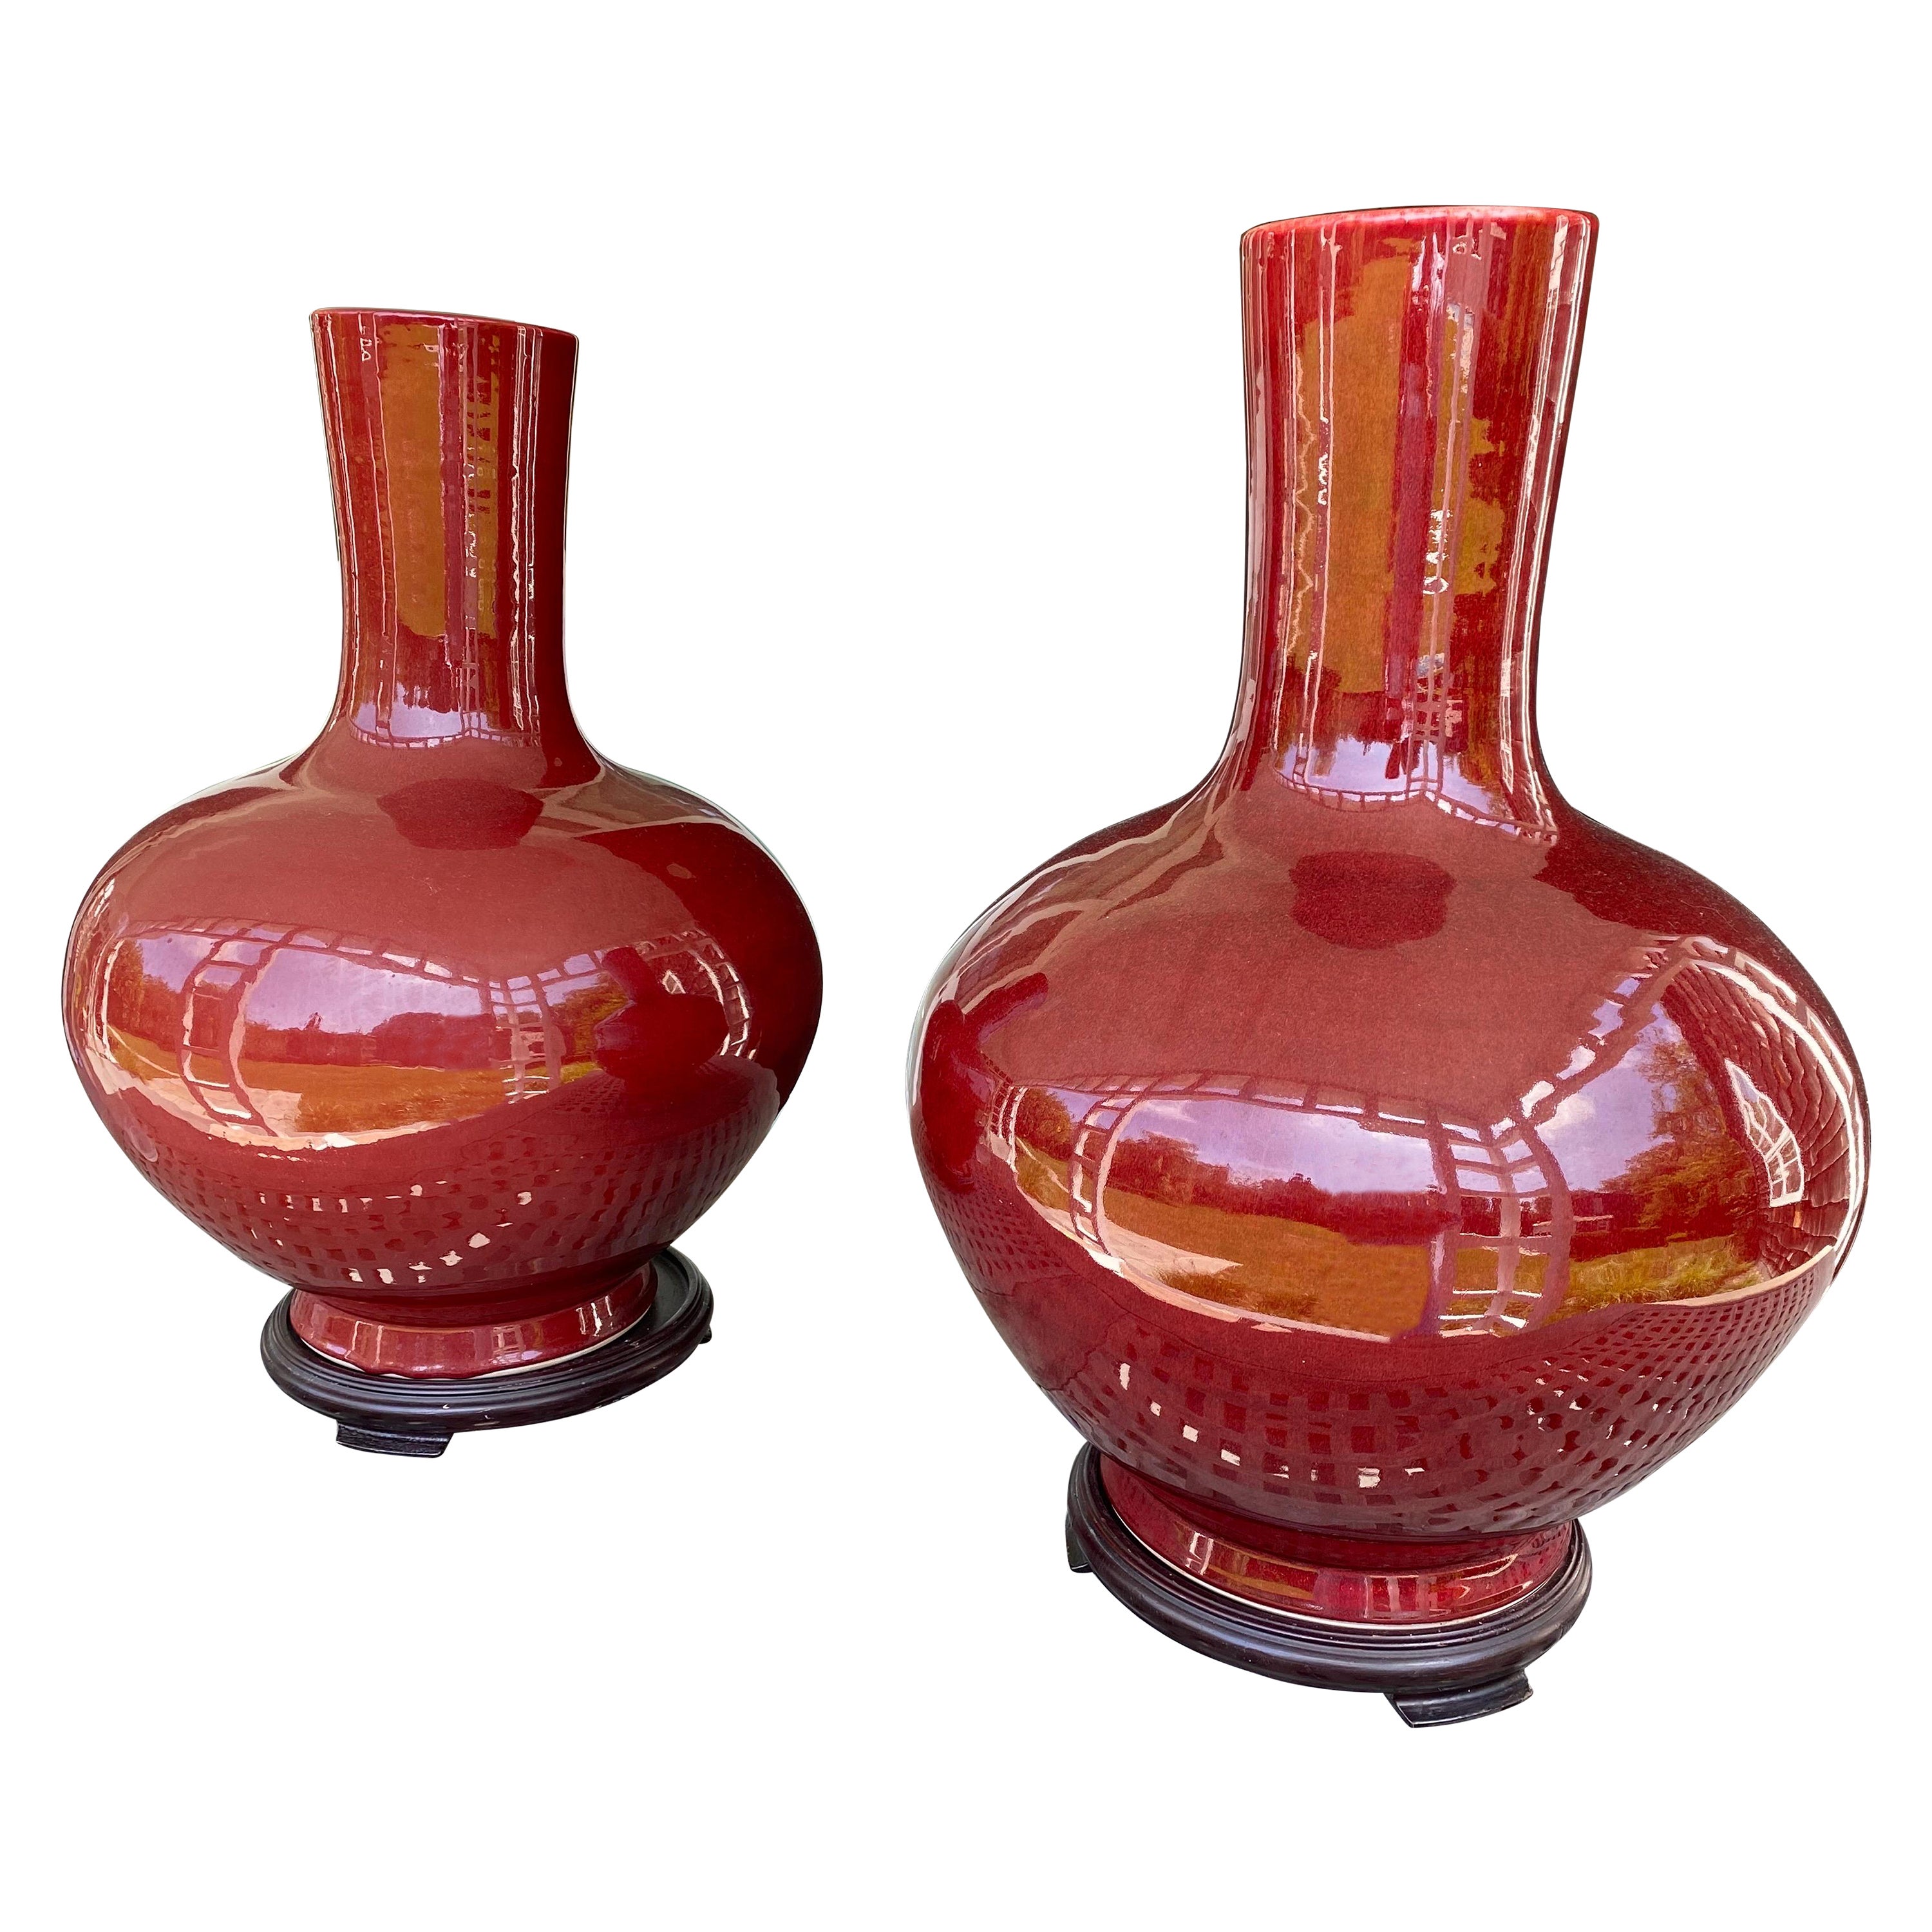 Pair of Chinese Large Sang-de-boeuf Glazed Red Vases, Early 20th Century